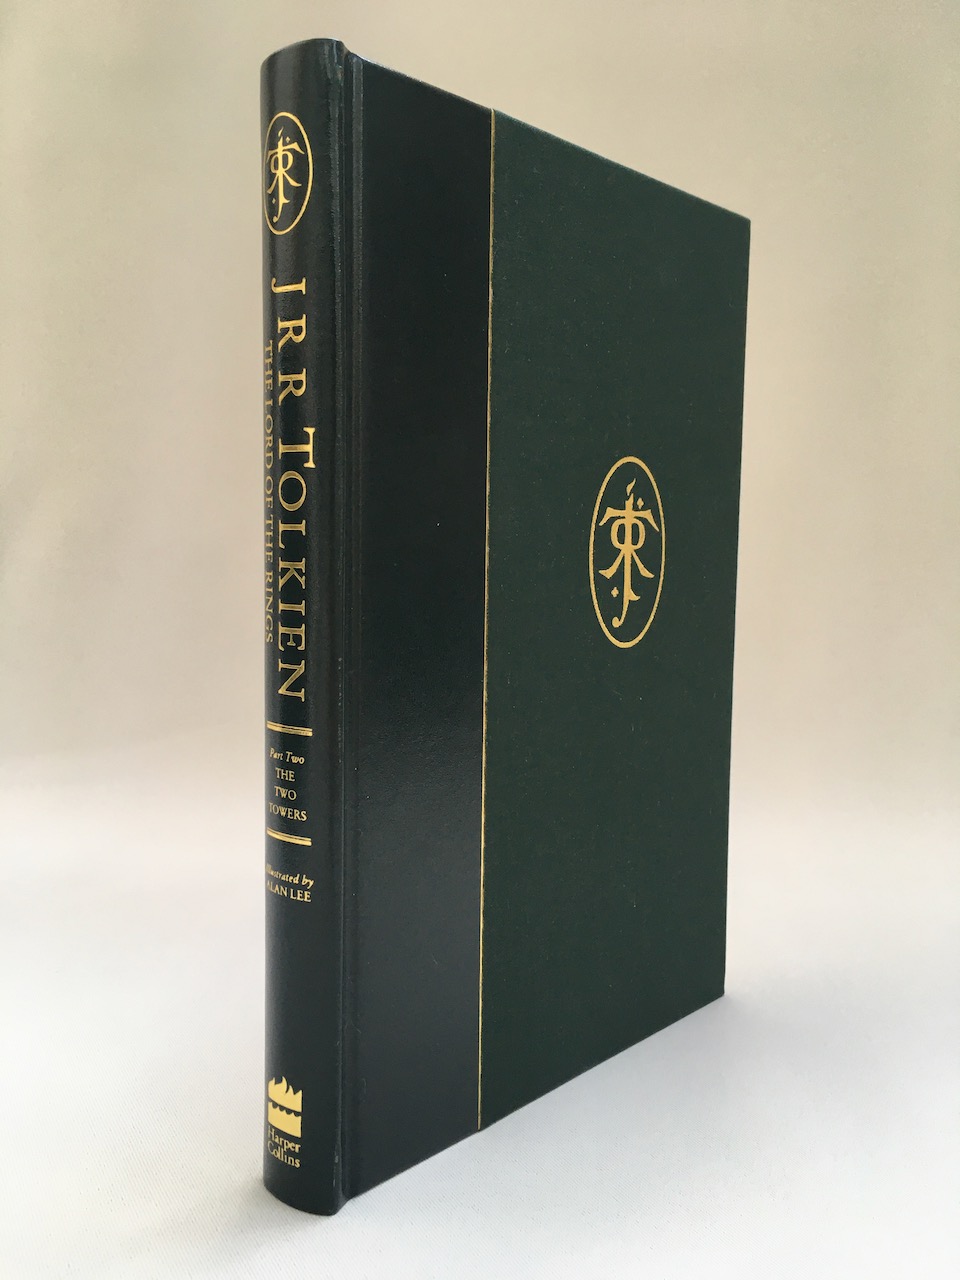  1992, The Lord of the Rings. Signed Alan Lee 3 volume Deluxe Limited Edition 27